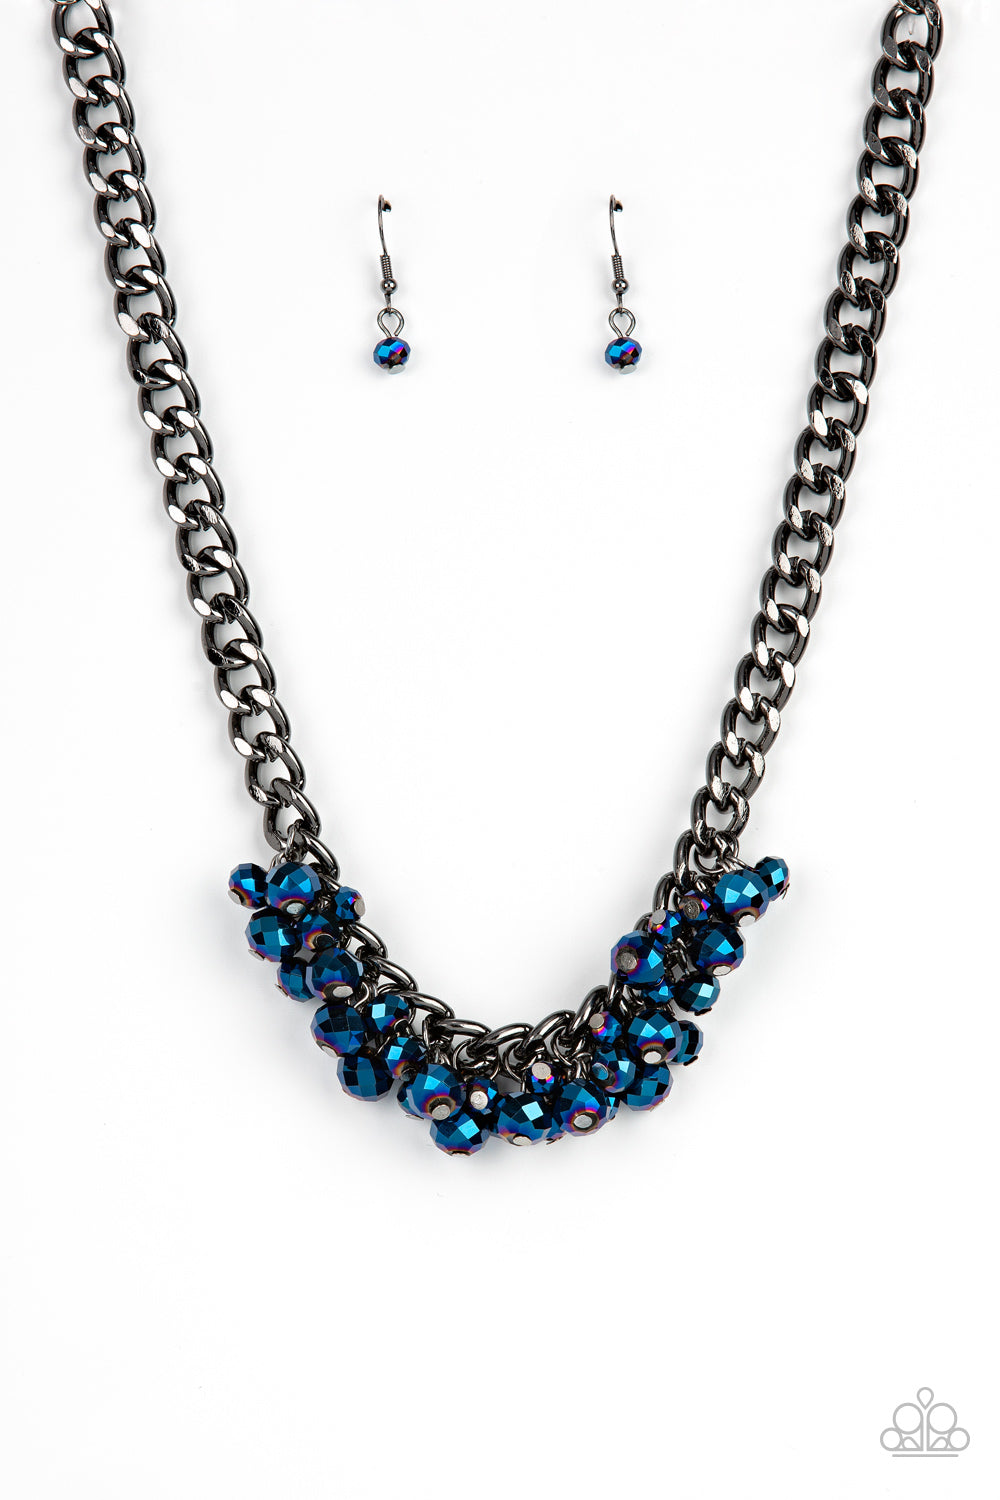 Galactic Knockout - Blue Beaded Necklaces faceted collection of metallic flecked blue beads cluster along the center of a chunky gunmetal curb chain, creating a stellar fringe below the collar. Features an adjustable clasp closure.  Sold as one individual necklace. Includes one pair of matching earrings.